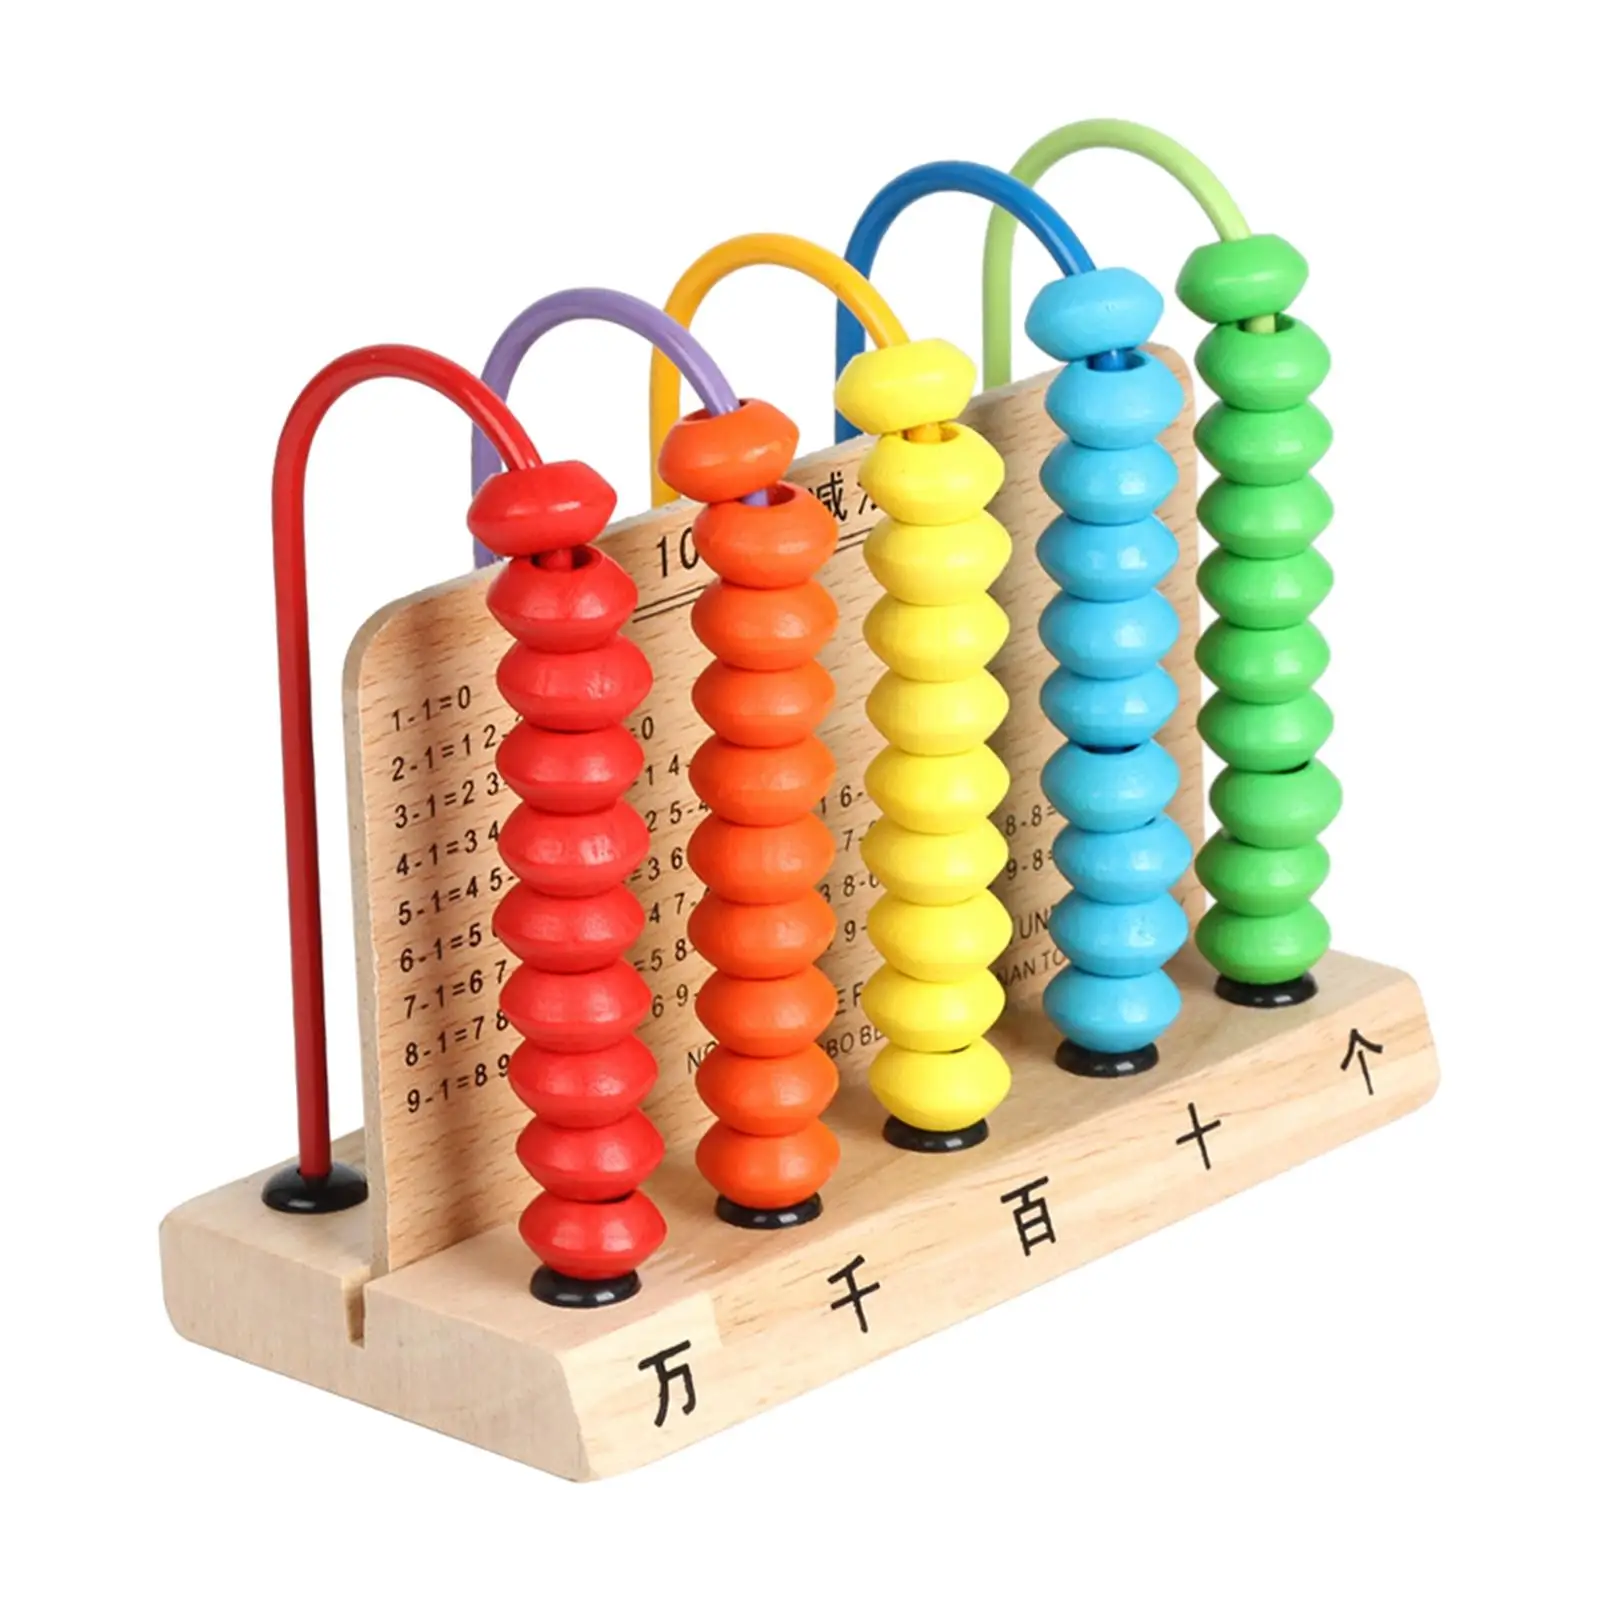 Counting Frame Educational Toy Colorful Beads Montessori Educational Learning Games Add Subtract Abacus for Kindergarten Baby